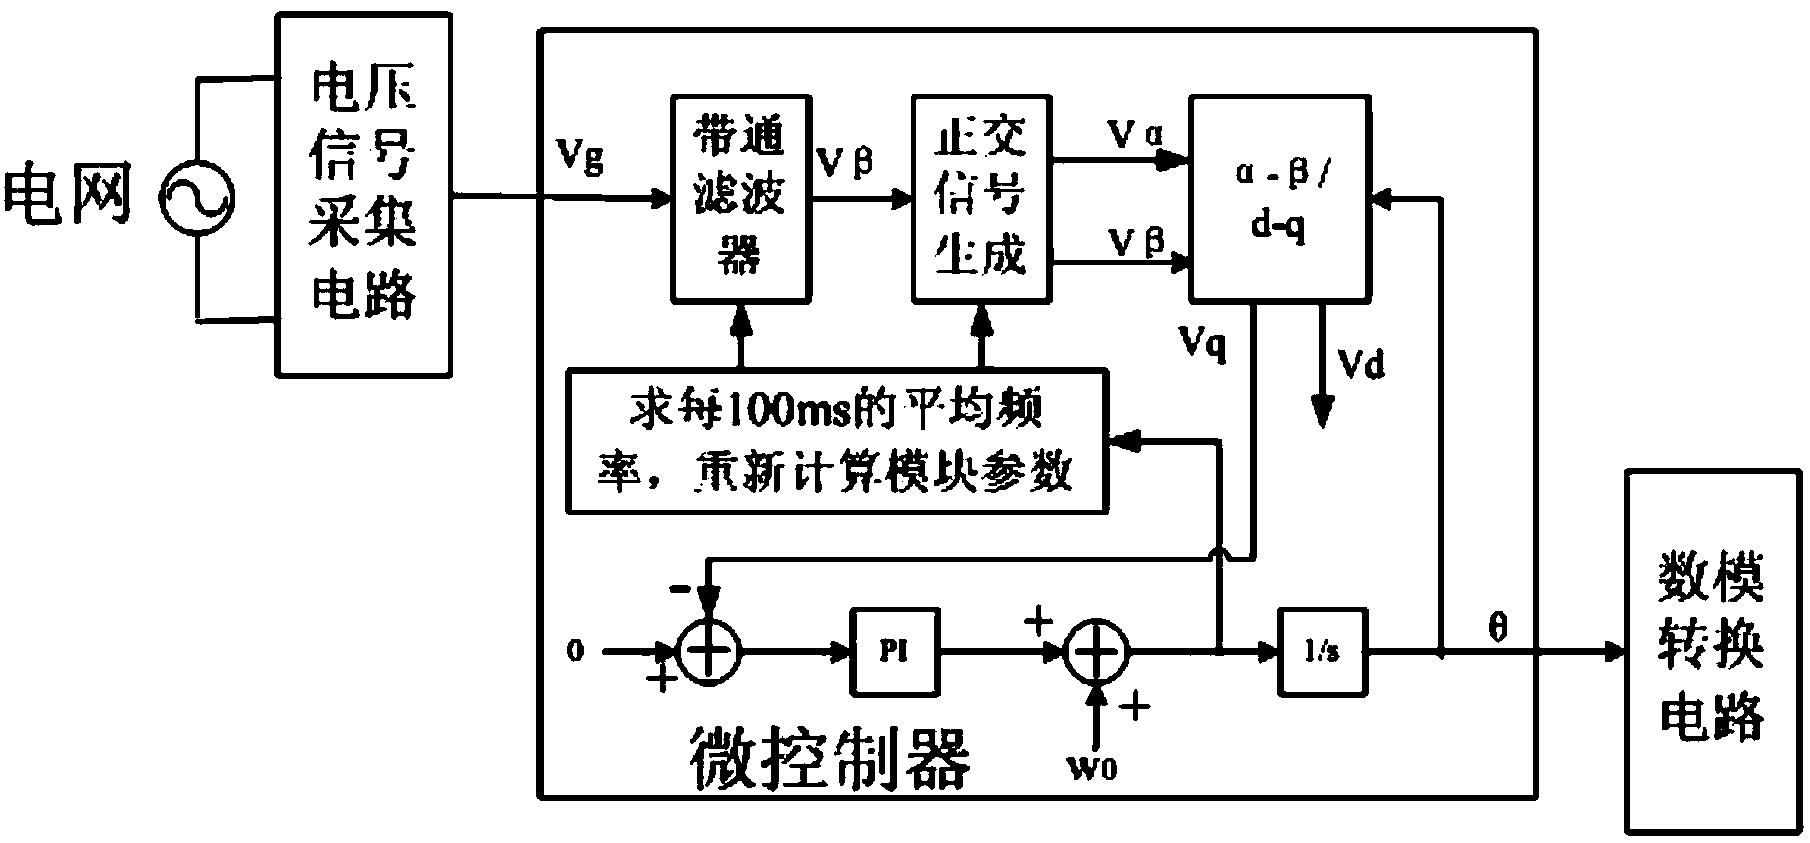 Method for using one-phase photovoltaic grid-connected inverter to detect network voltage phase